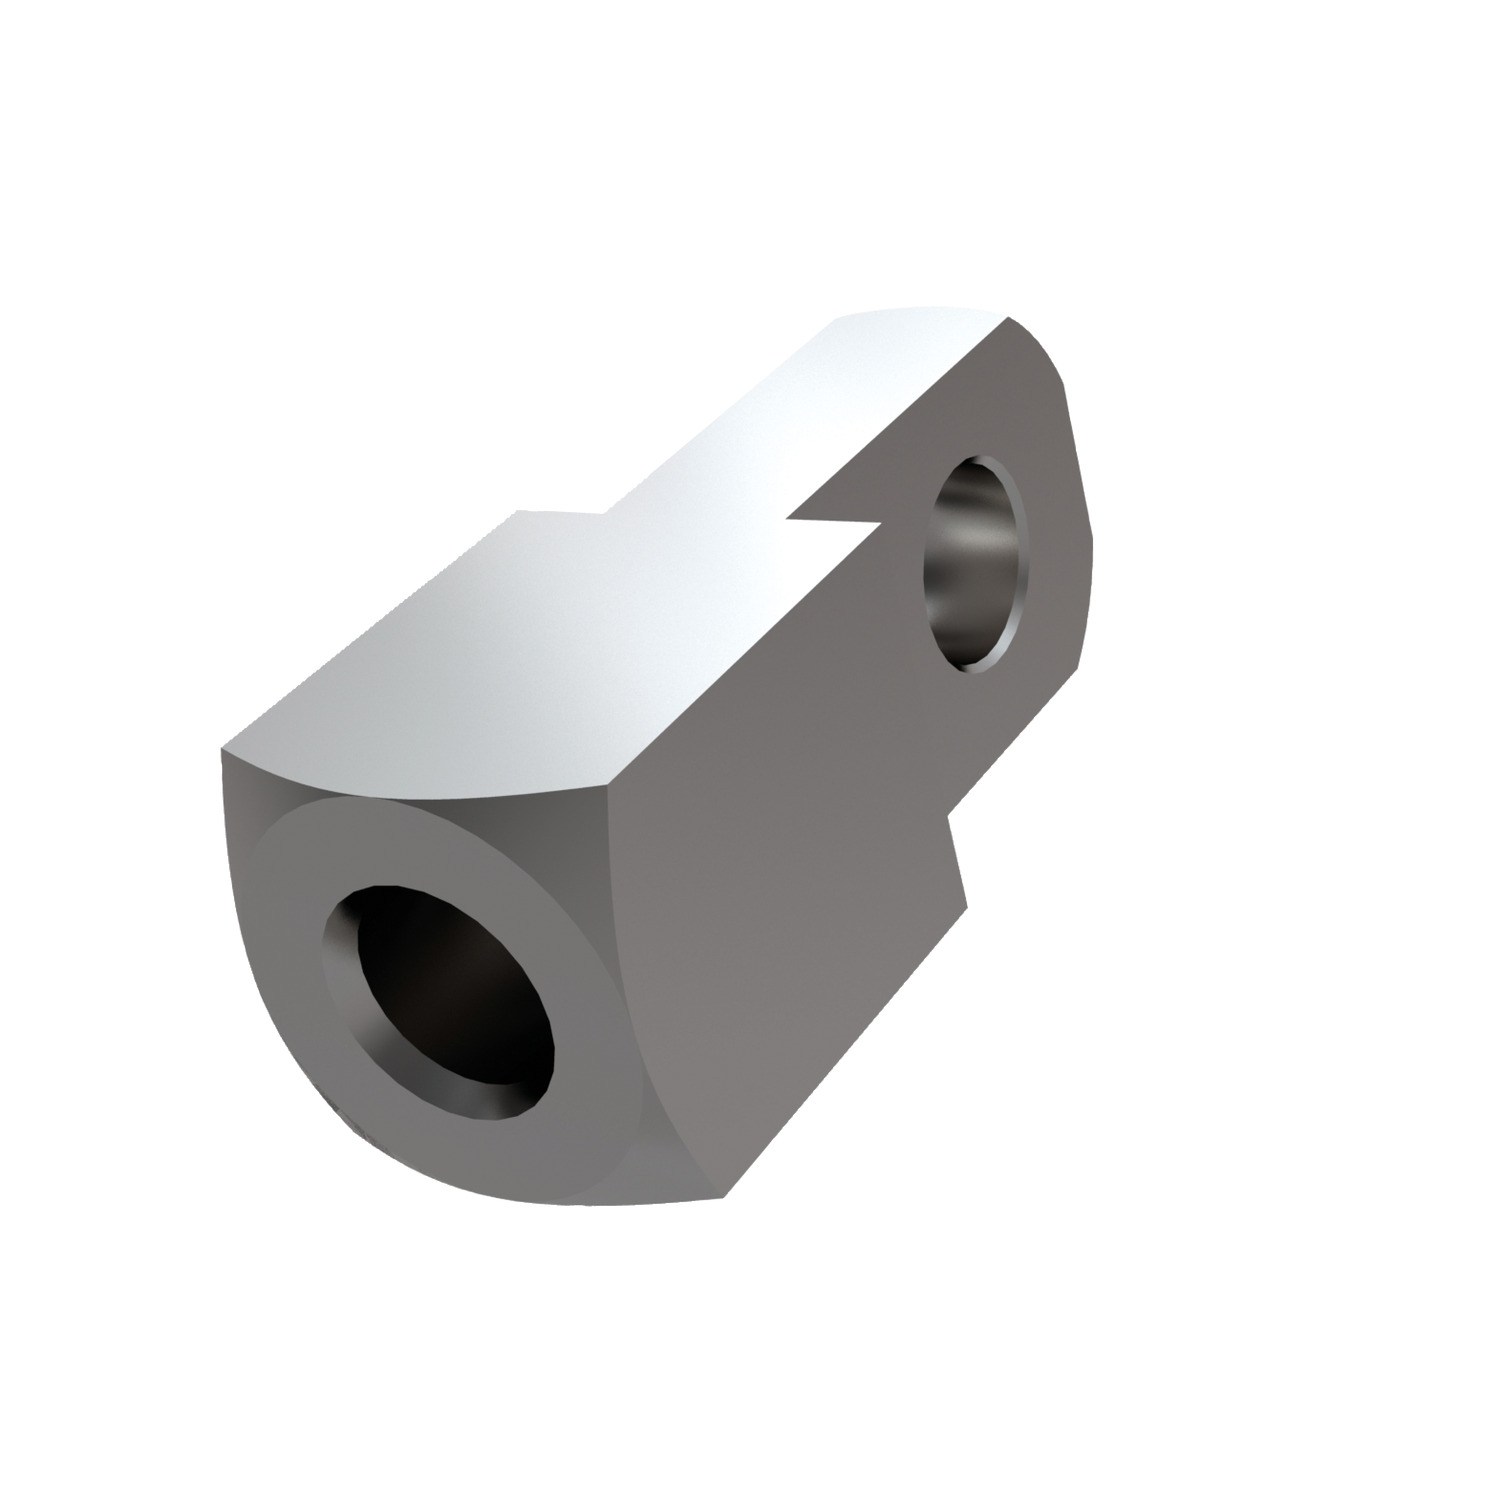 65656 - Stainless Mating Piece for Clevis Joints